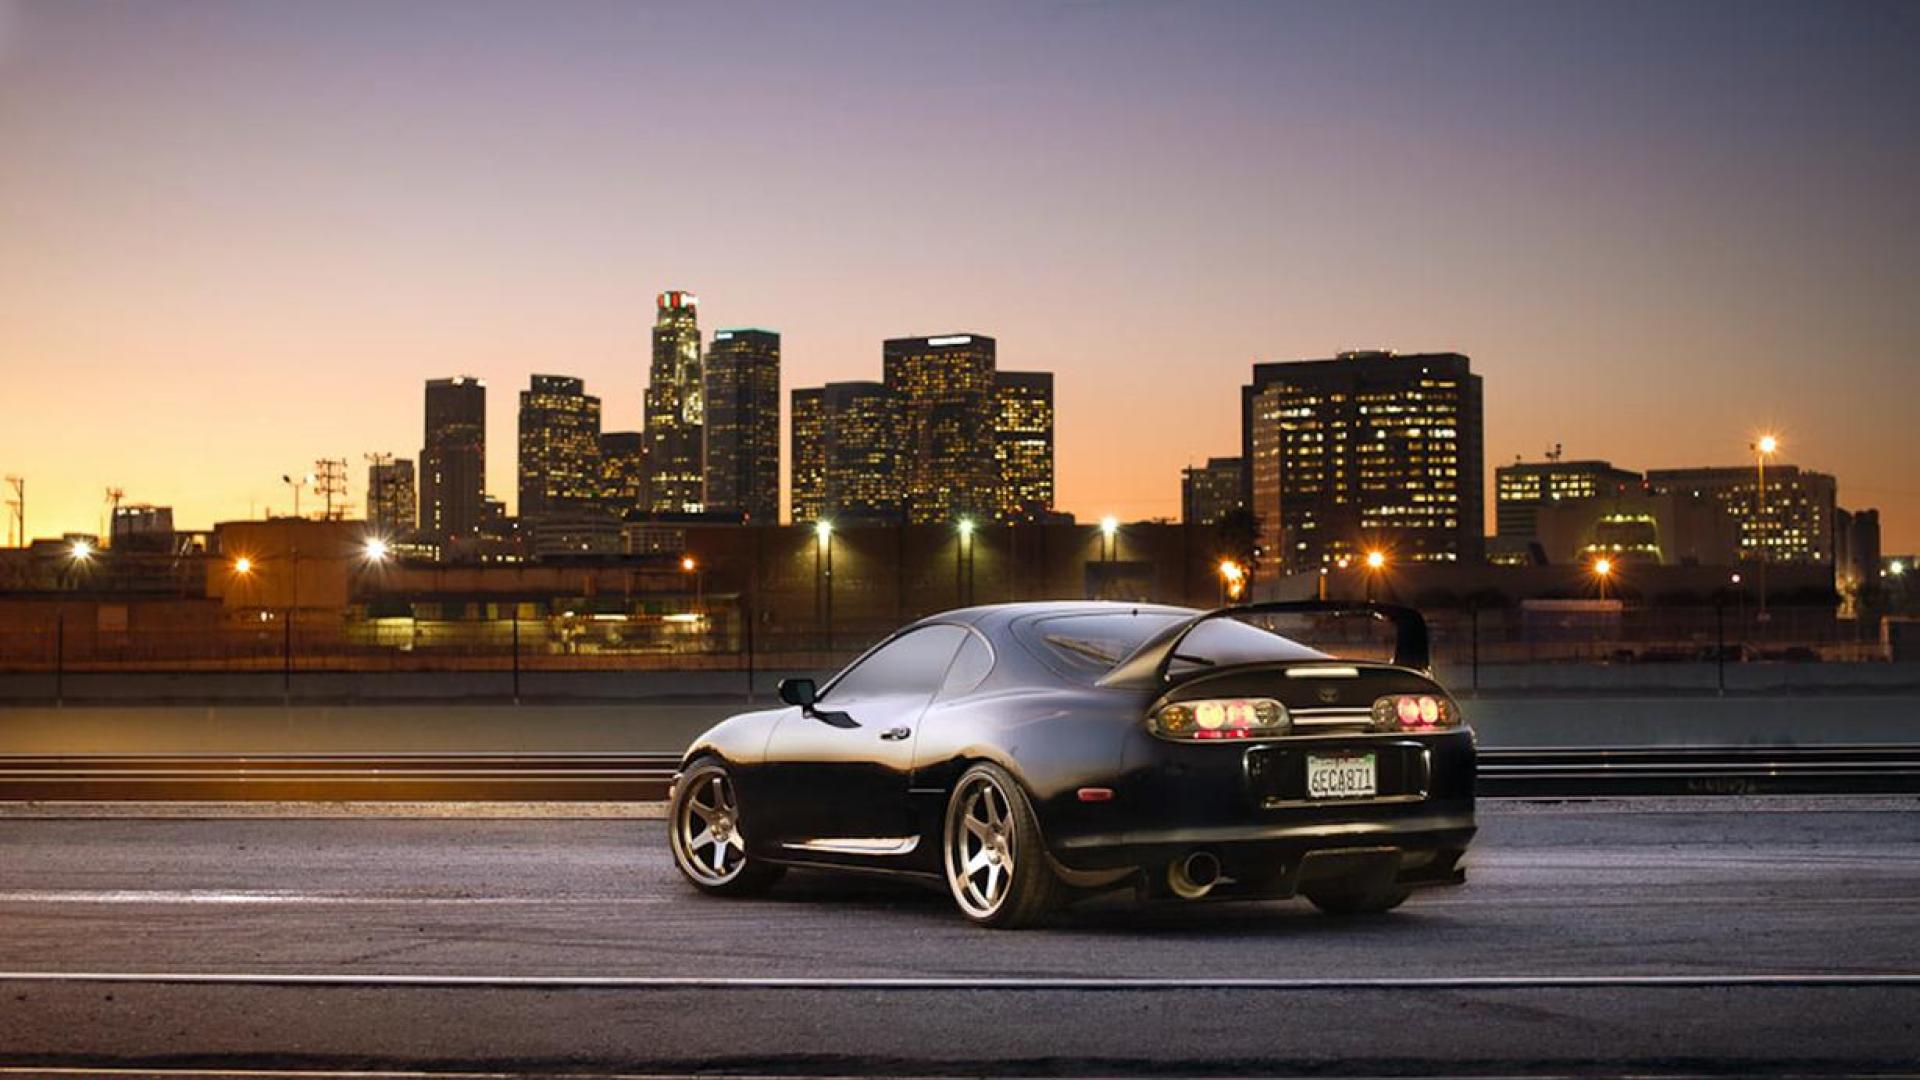 toyota supra girls and cars cars background wallpaper on ba5811